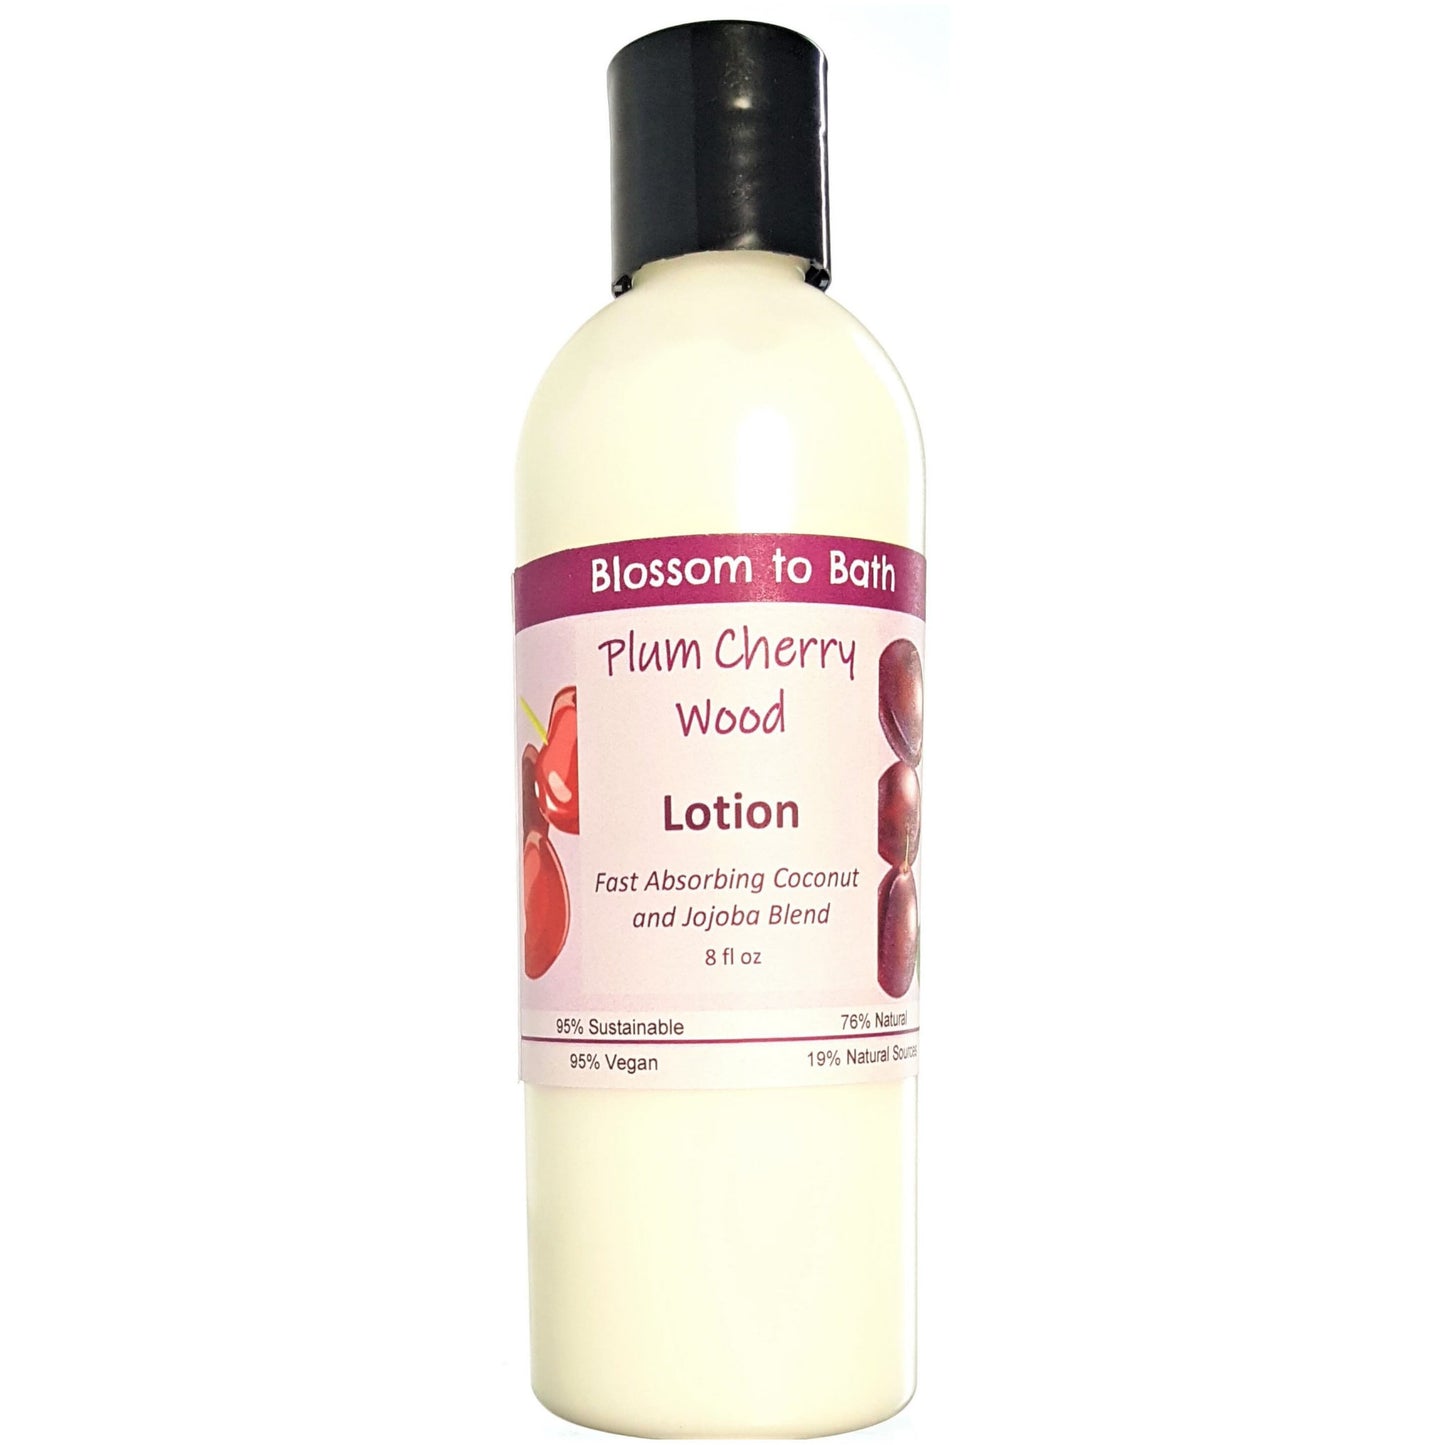 Buy Blossom to Bath Plum Cherry Wood Lotion from Flowersong Soap Studio.  Daily moisture  that soaks in quickly made with organic oils and butters that soften and smooth the skin  A charmingly sweet and woodsy fragrance.